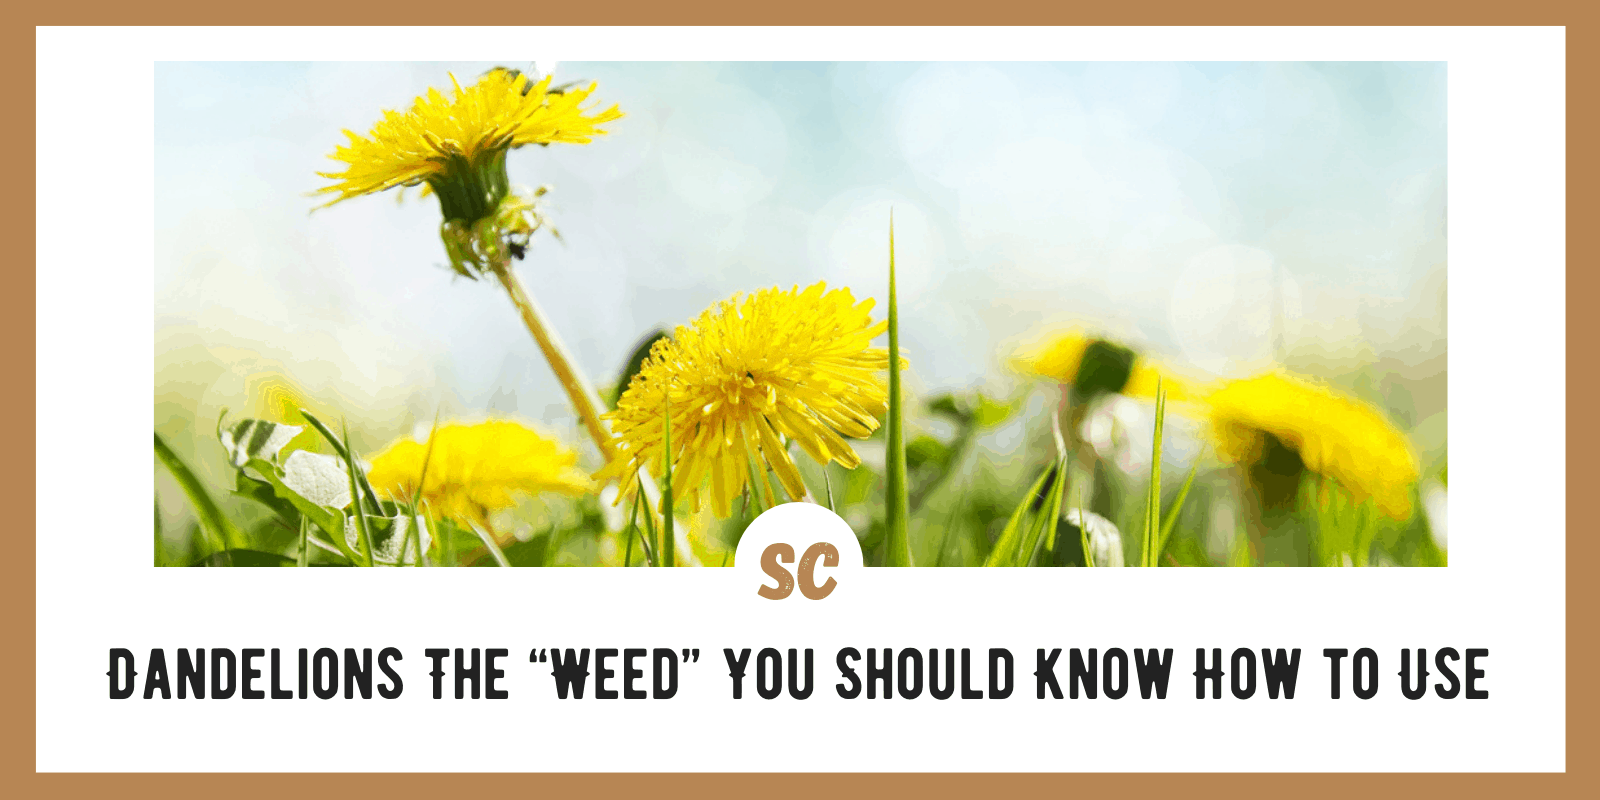 Dandelions: Survival “Weed” You Should Know How to Use